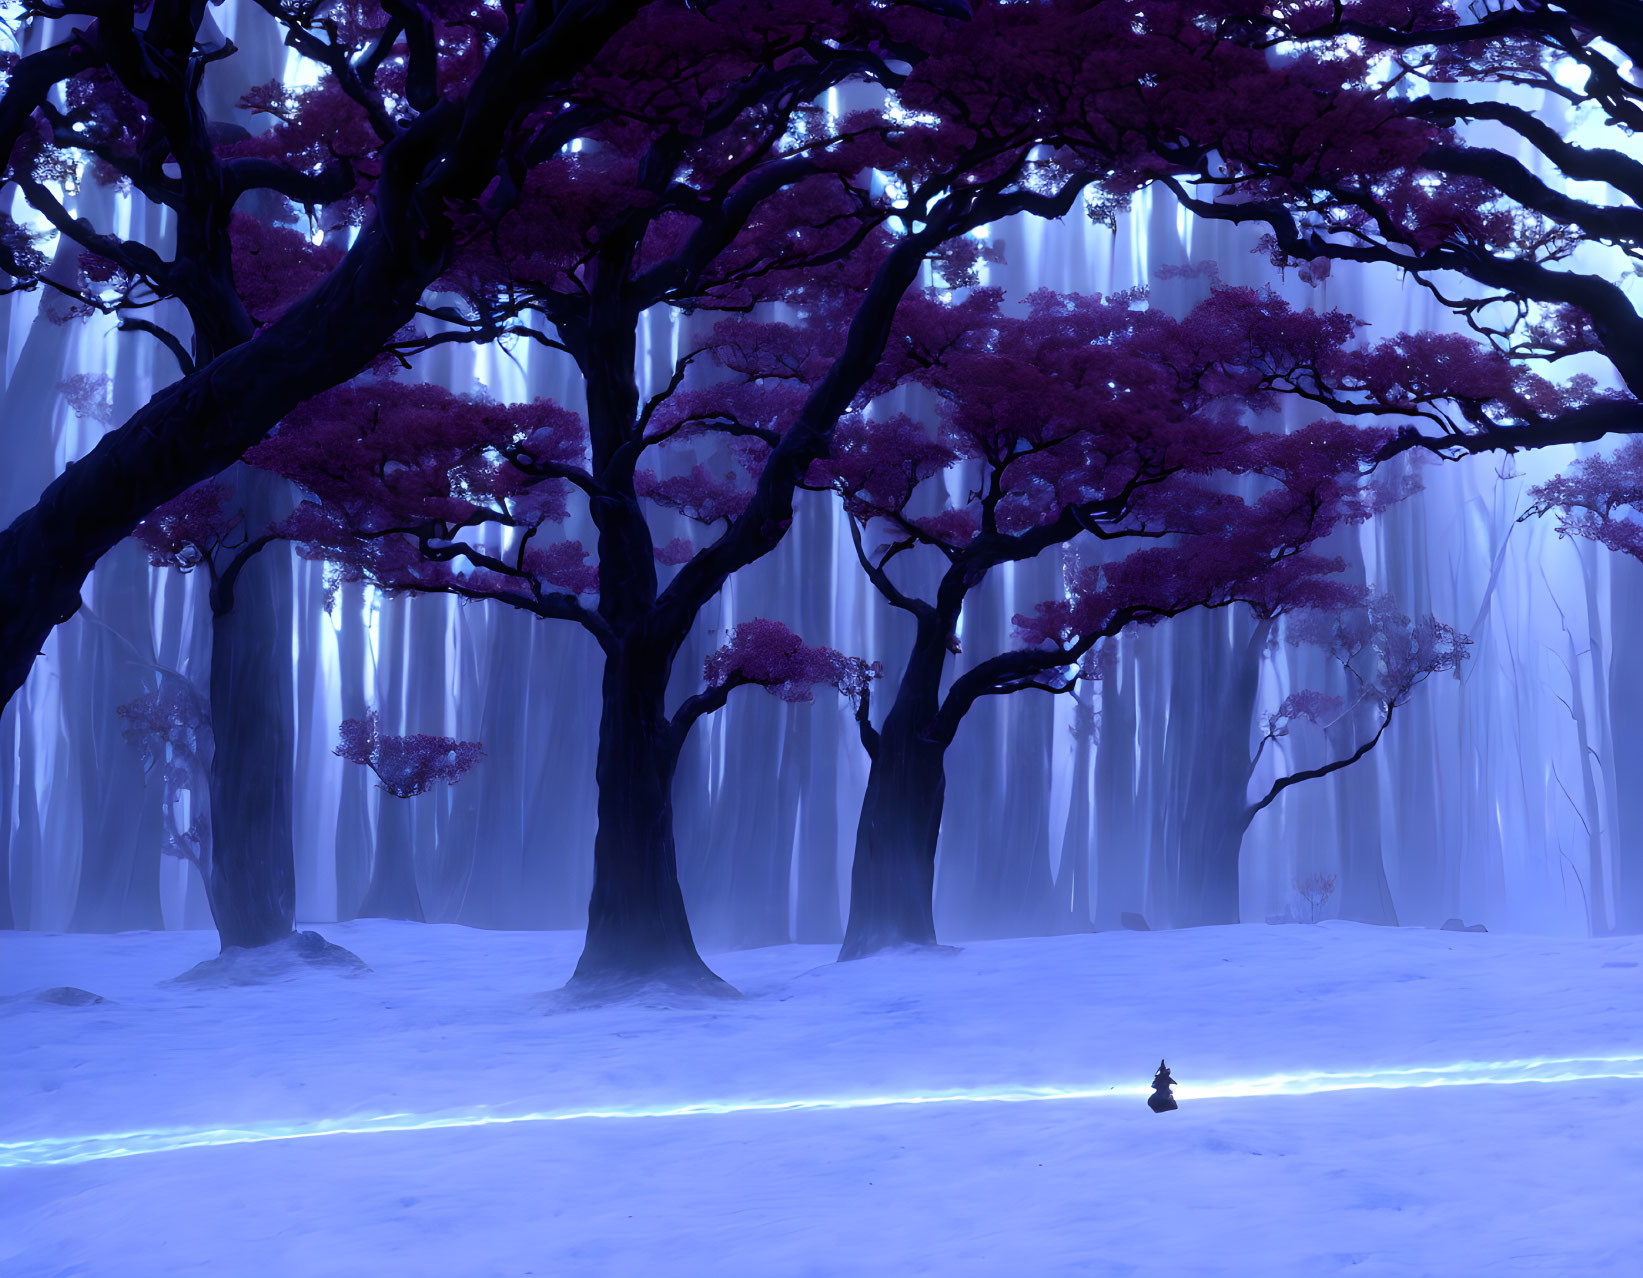 The Forest Of Everlasting Snow